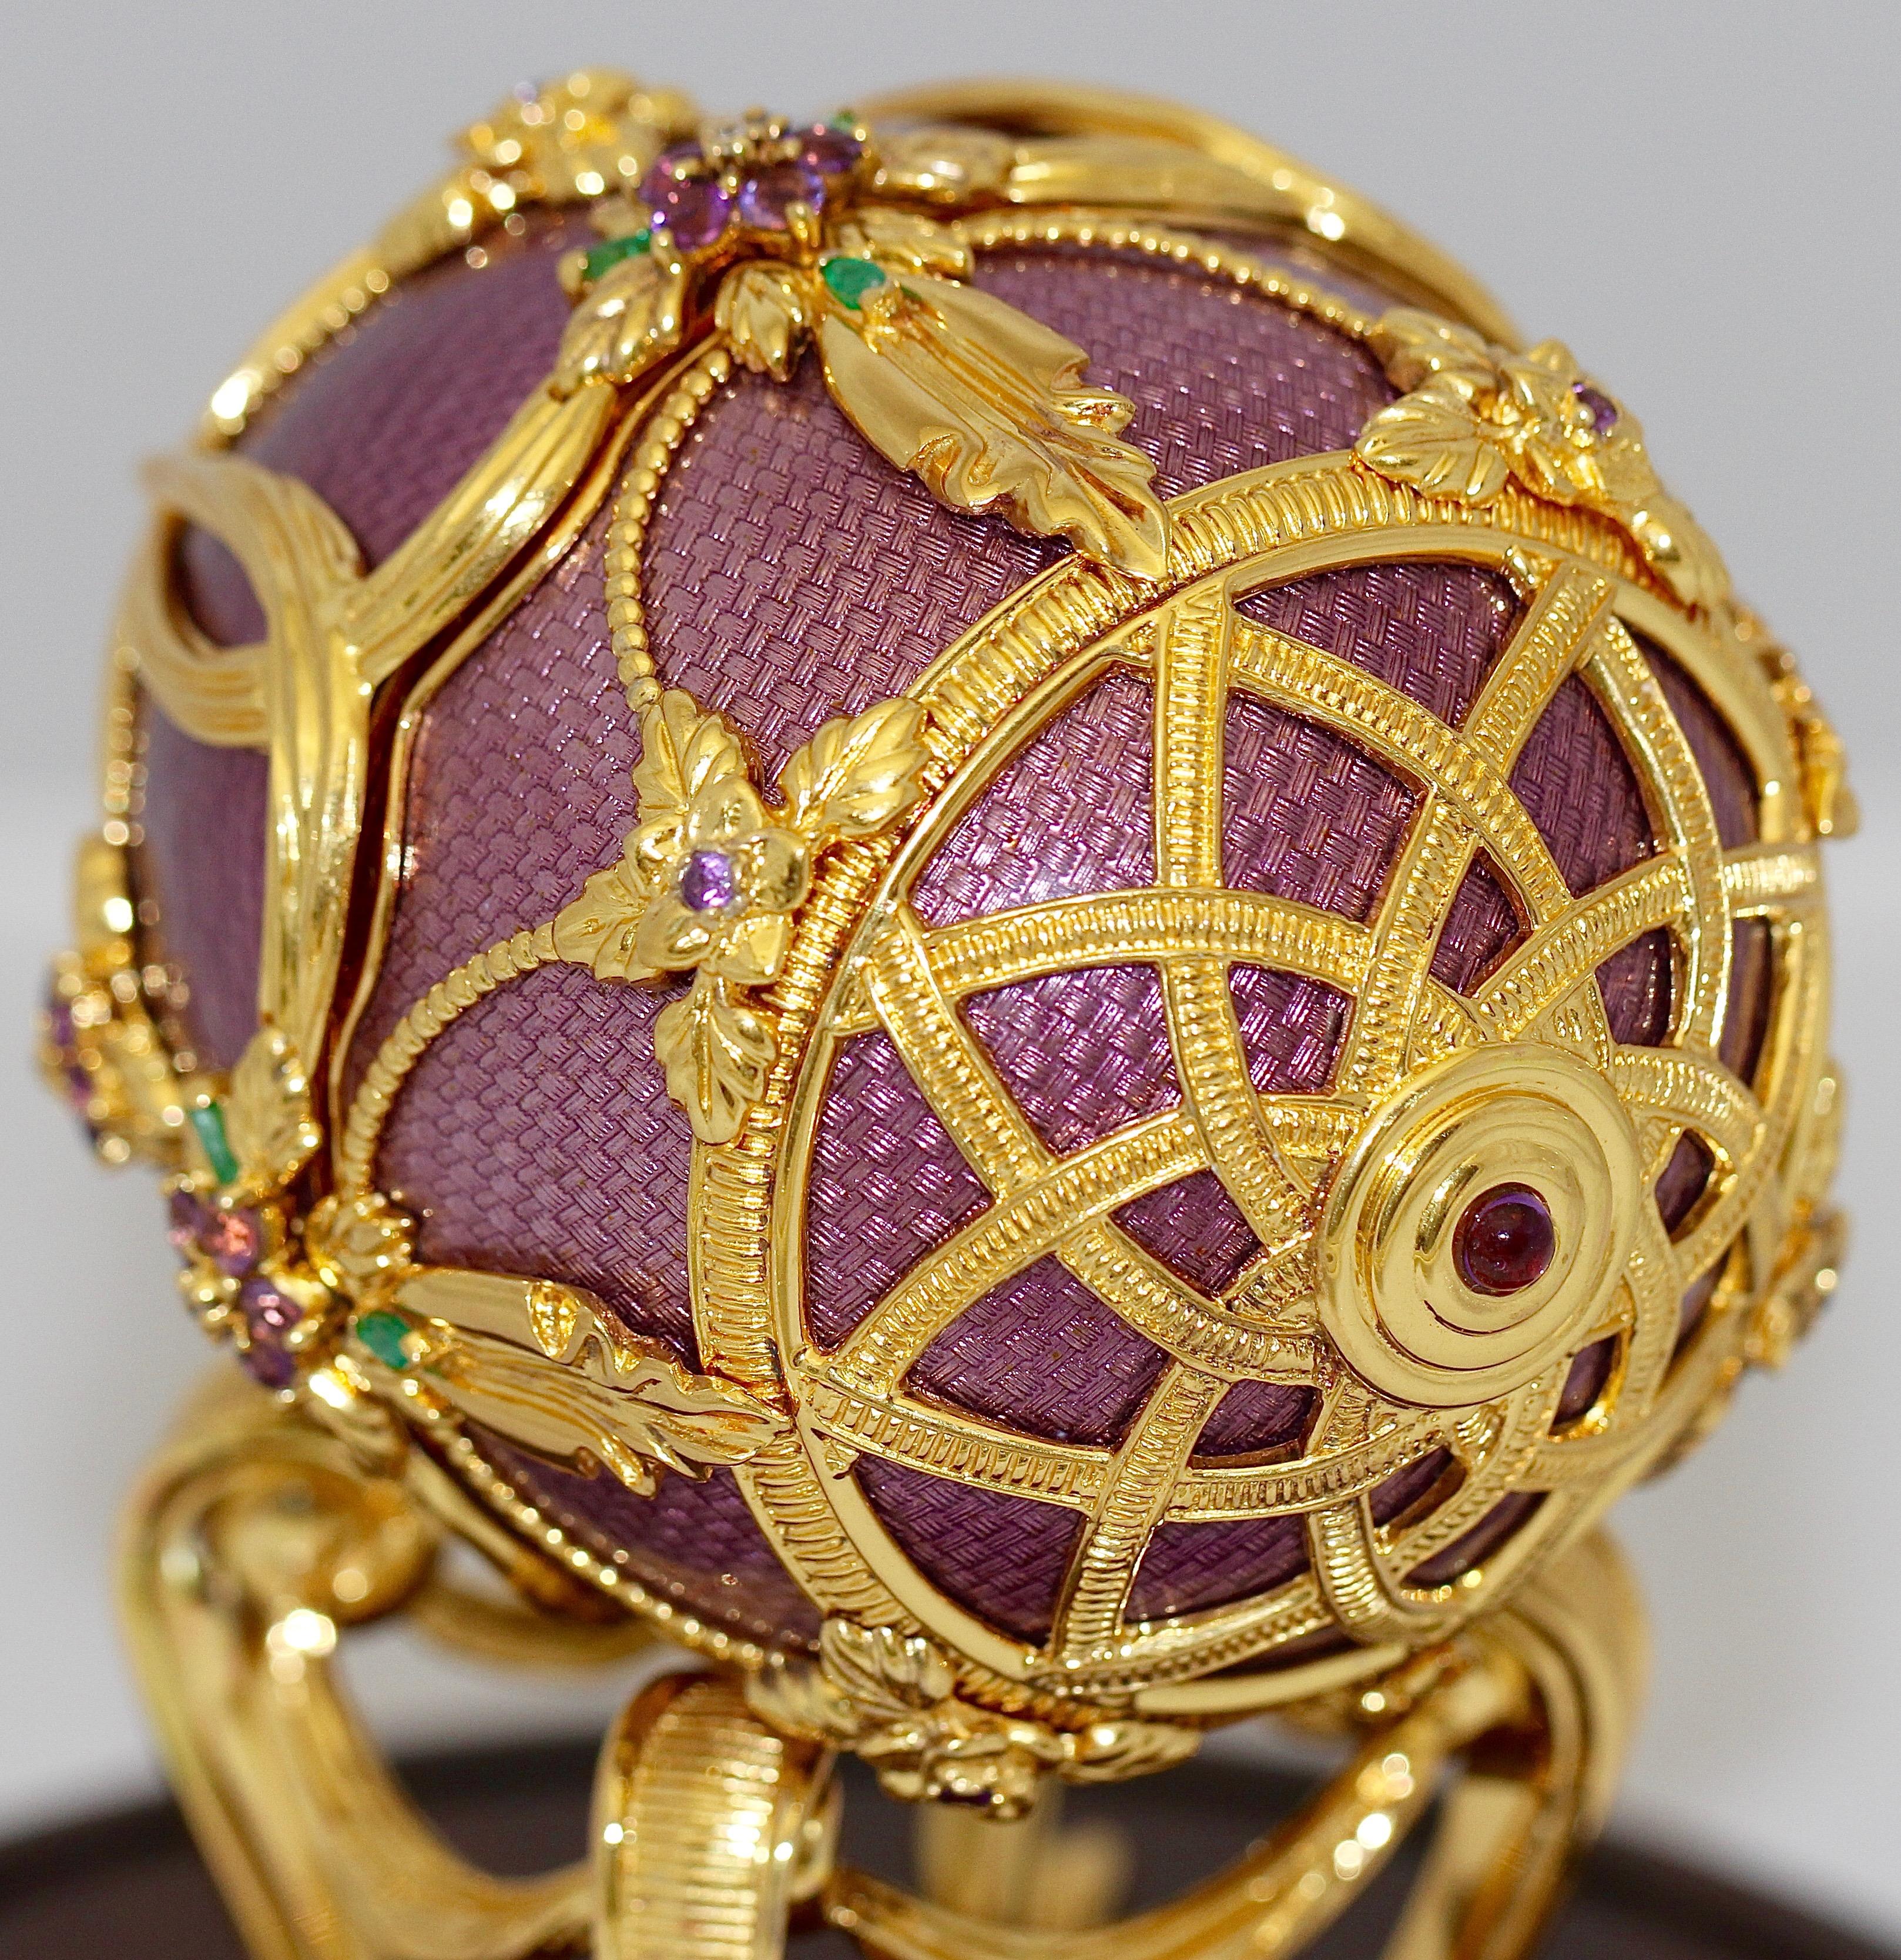 house of faberge egg